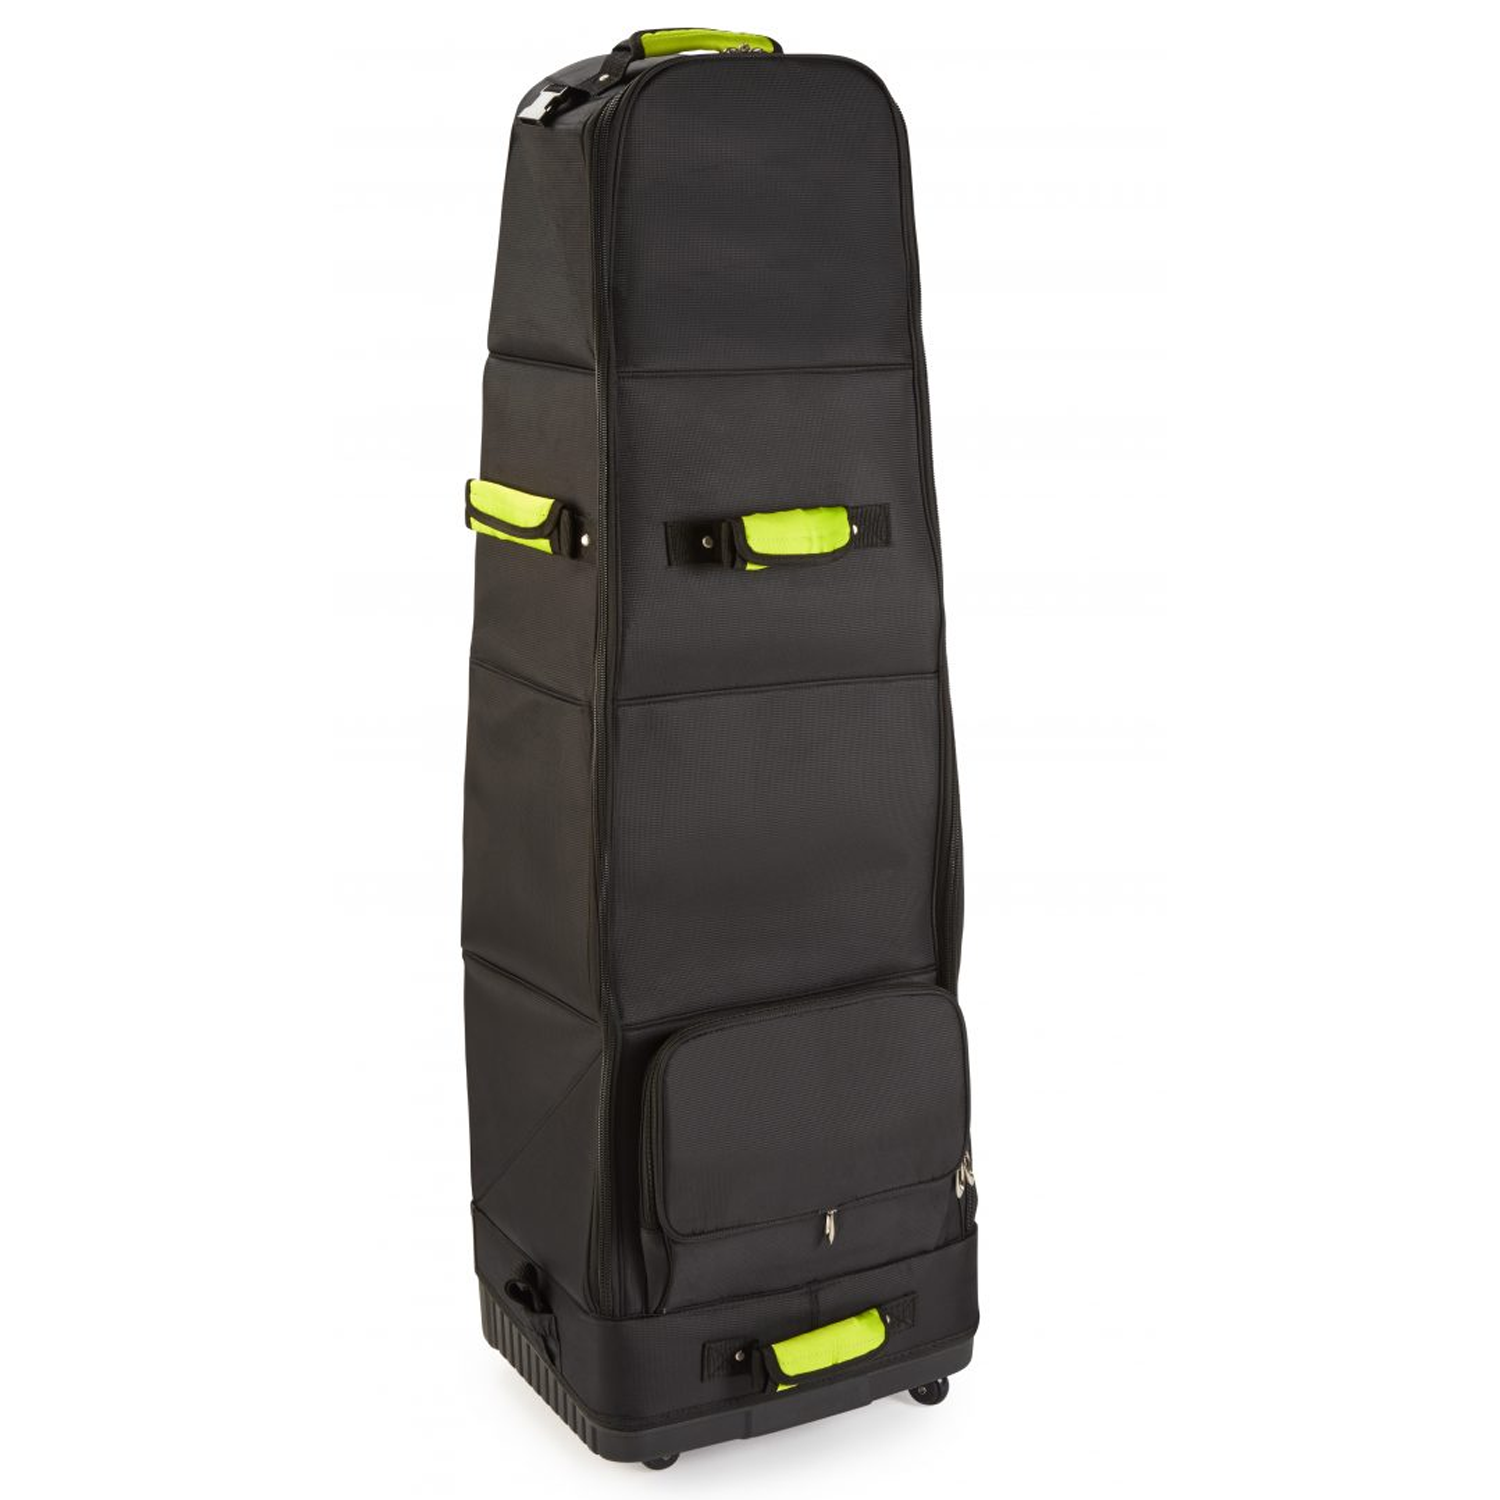 Northern Golf Deluxe Folding Travel Cover